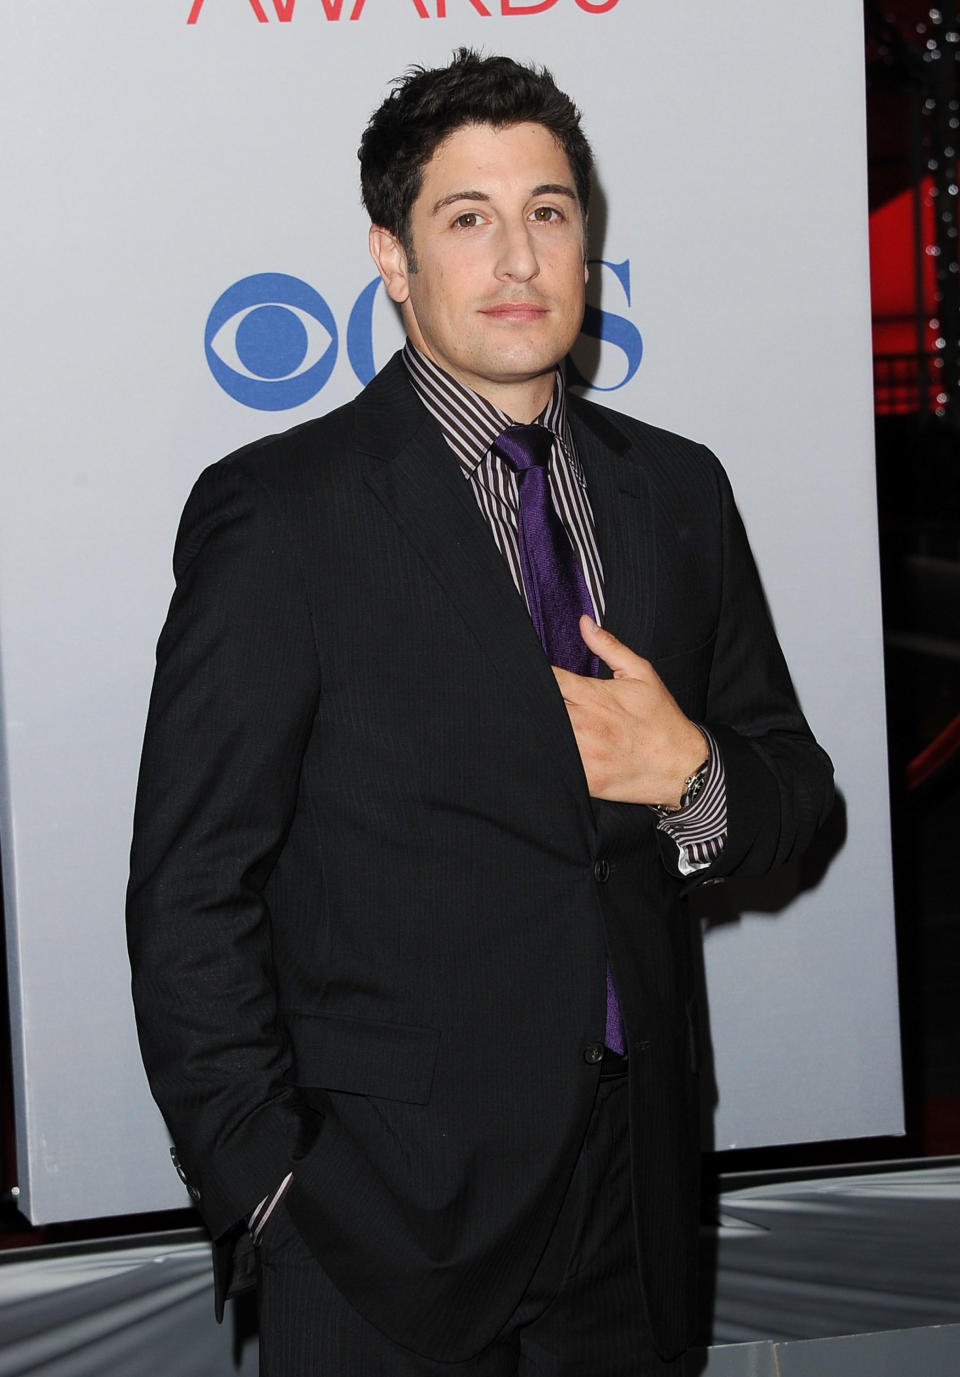 LOS ANGELES, CA - JANUARY 11: Actor Jason Biggs arrives at the 2012 People's Choice Awards held at Nokia Theatre L.A. Live on January 11, 2012 in Los Angeles, California. (Photo by Jason Merritt/Getty Images)